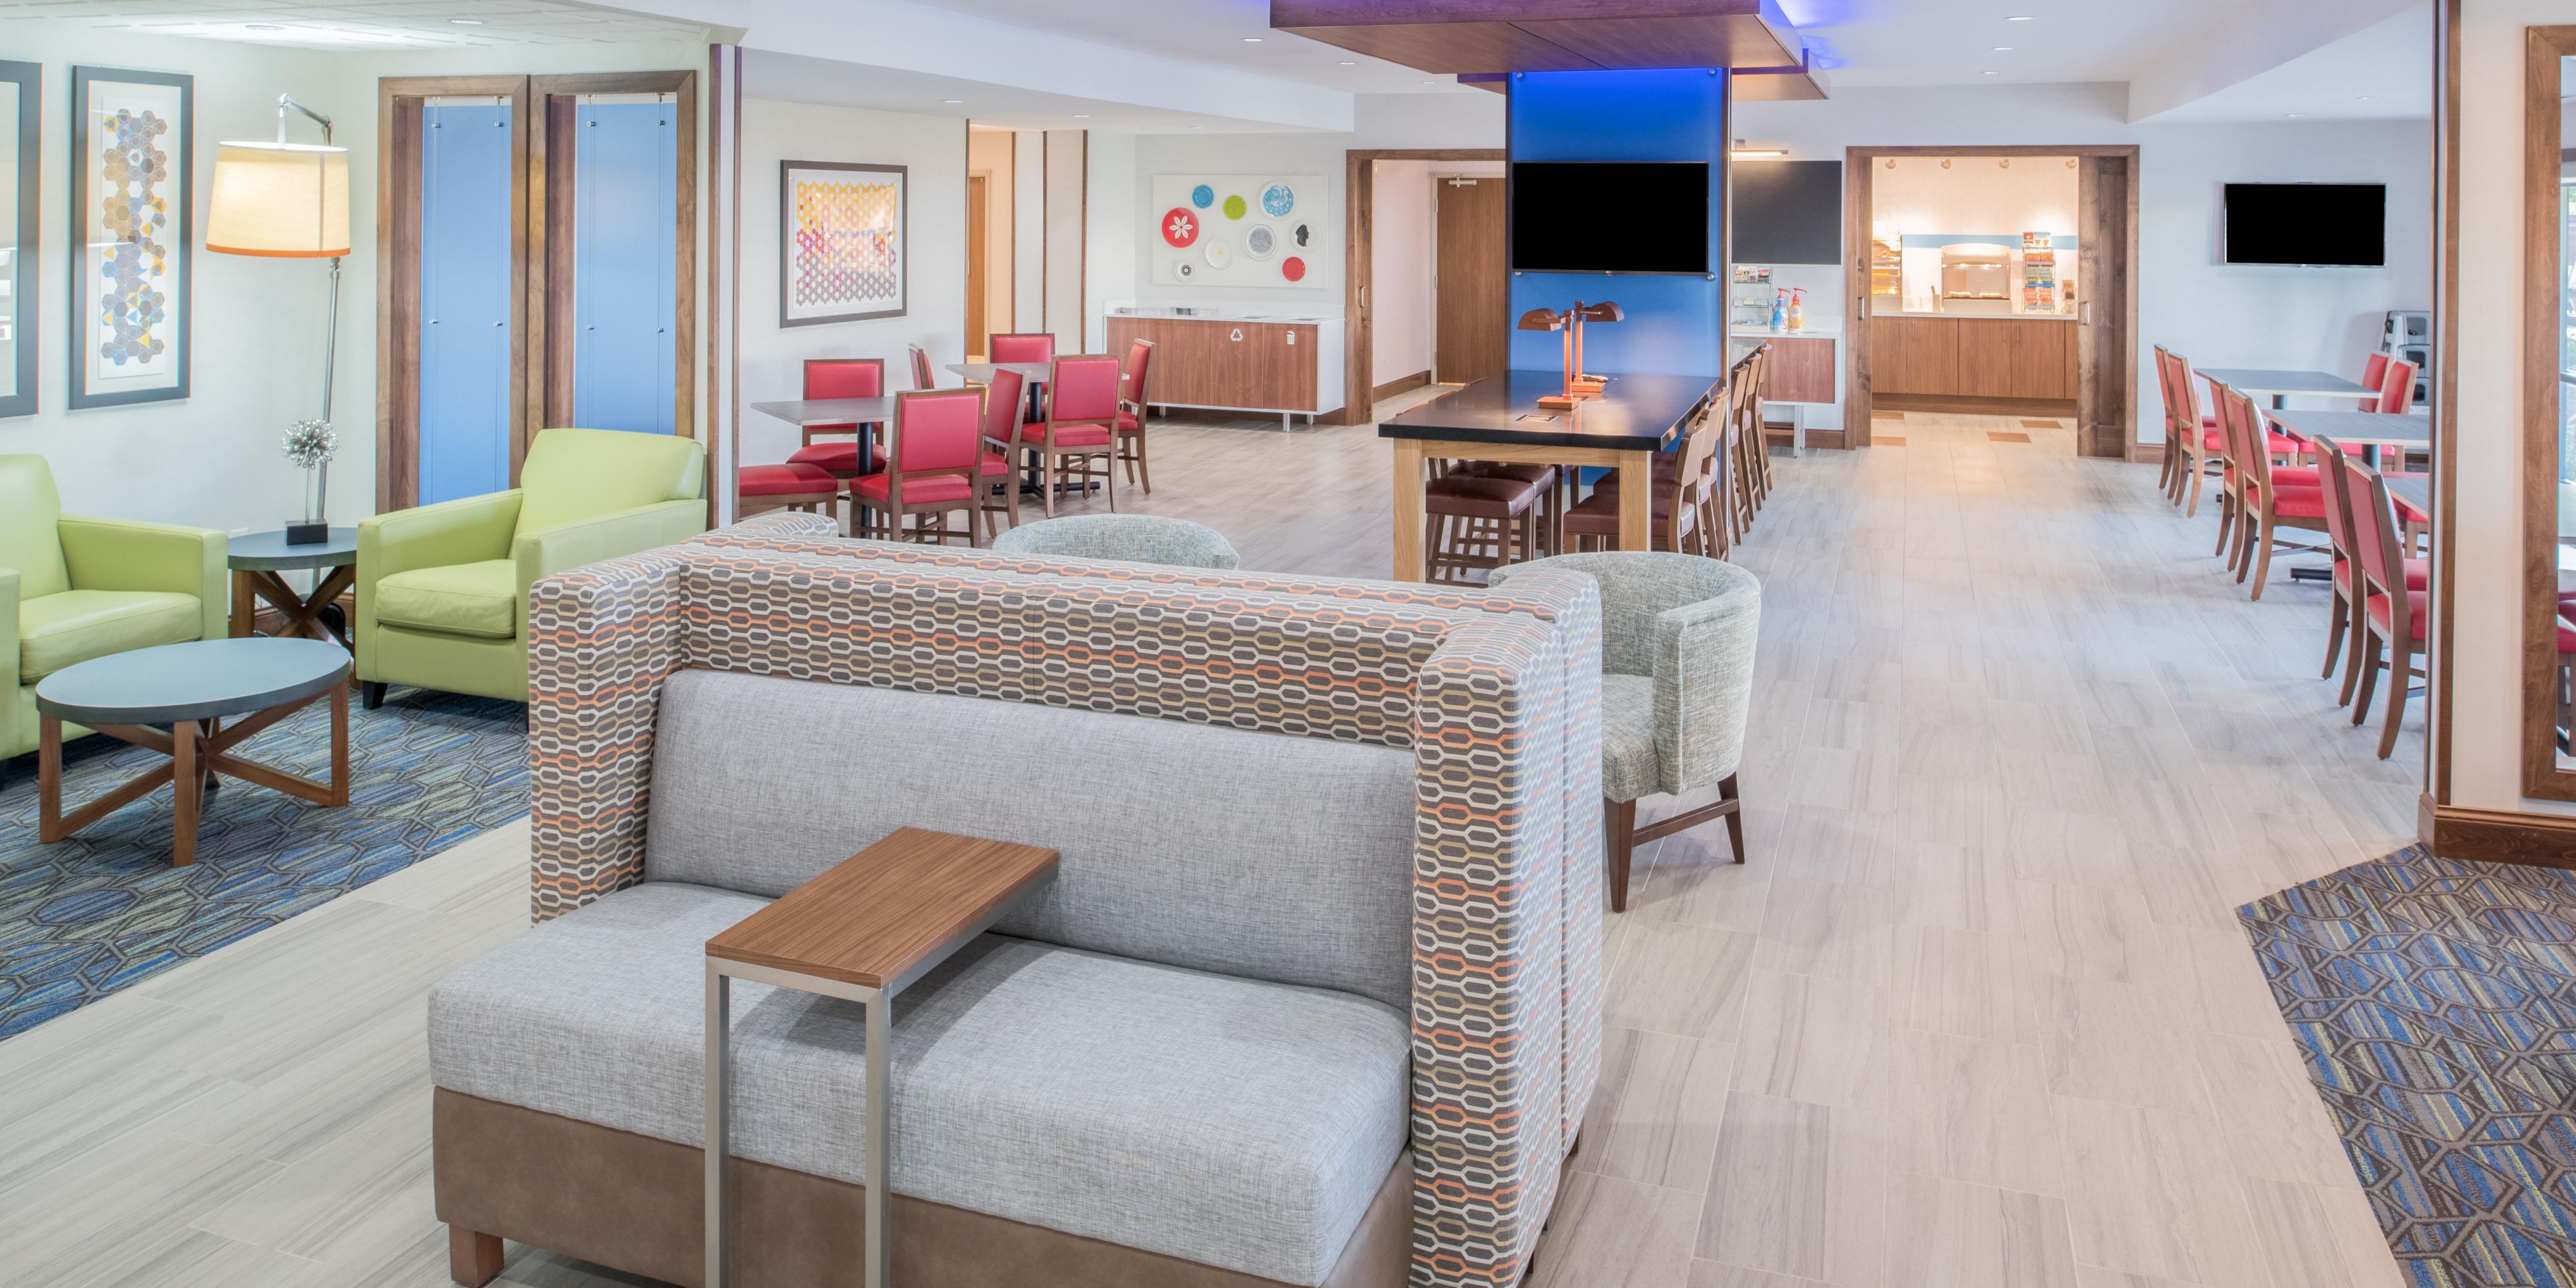 From our public areas to our guest rooms, our hotel has been fully renovated!